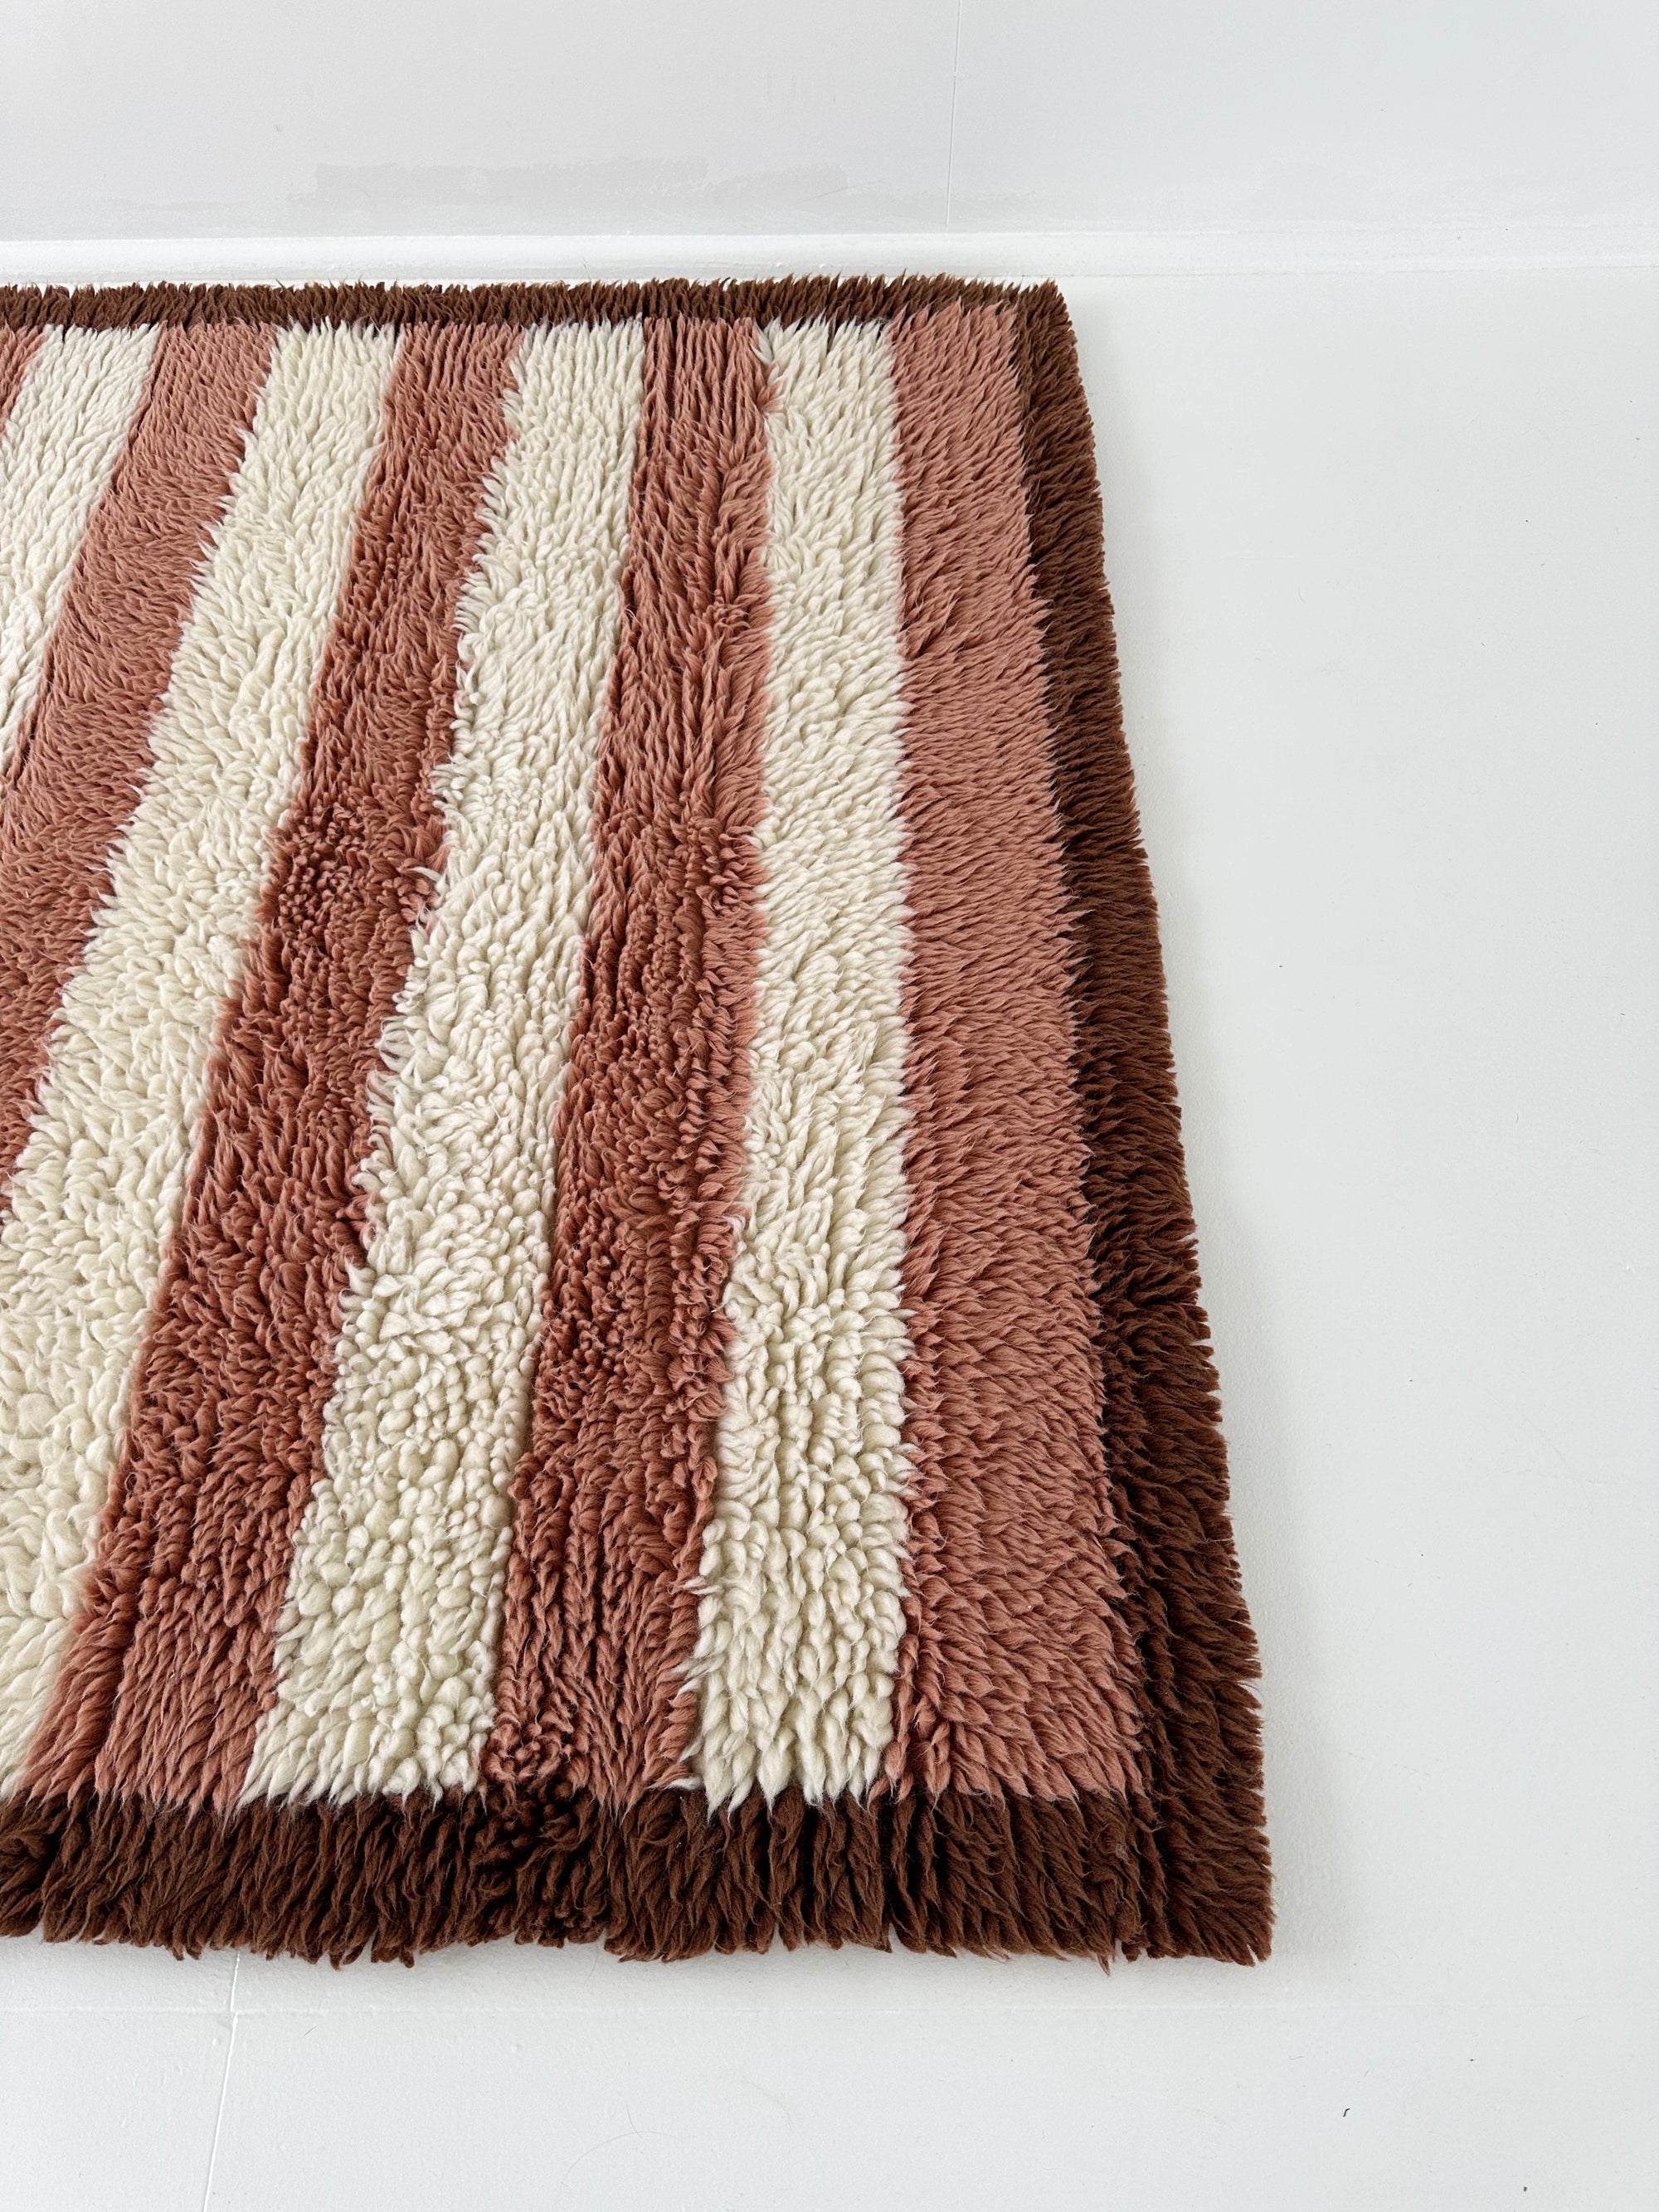 BONNIE AND NEIL STRIPE COCOA RUG: MED